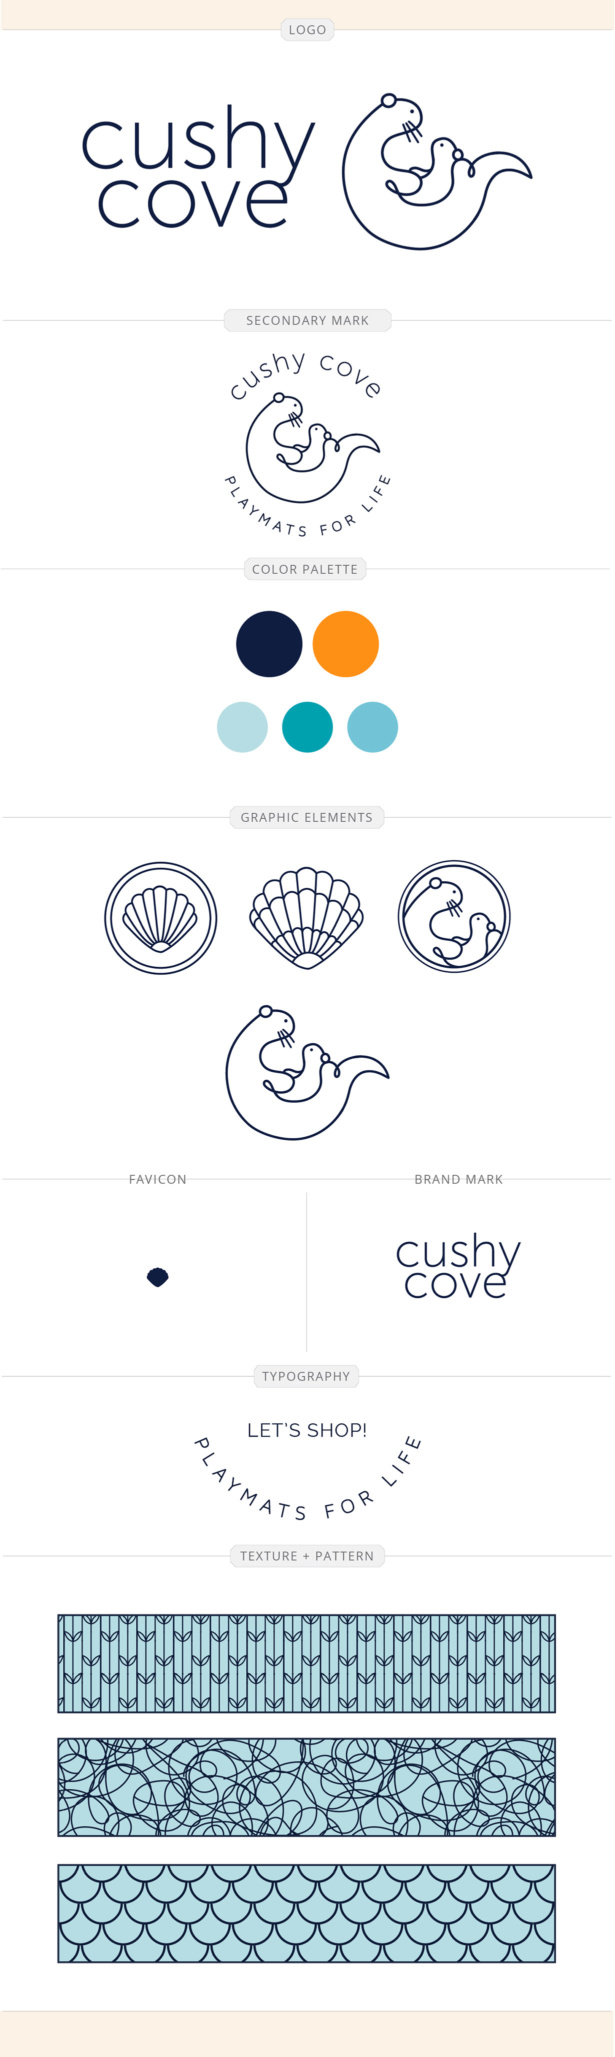 Cushy Cove Quick Brand Guide. After seeing success selling on Amazon, JJ came to us to turn his import business into a real brand.